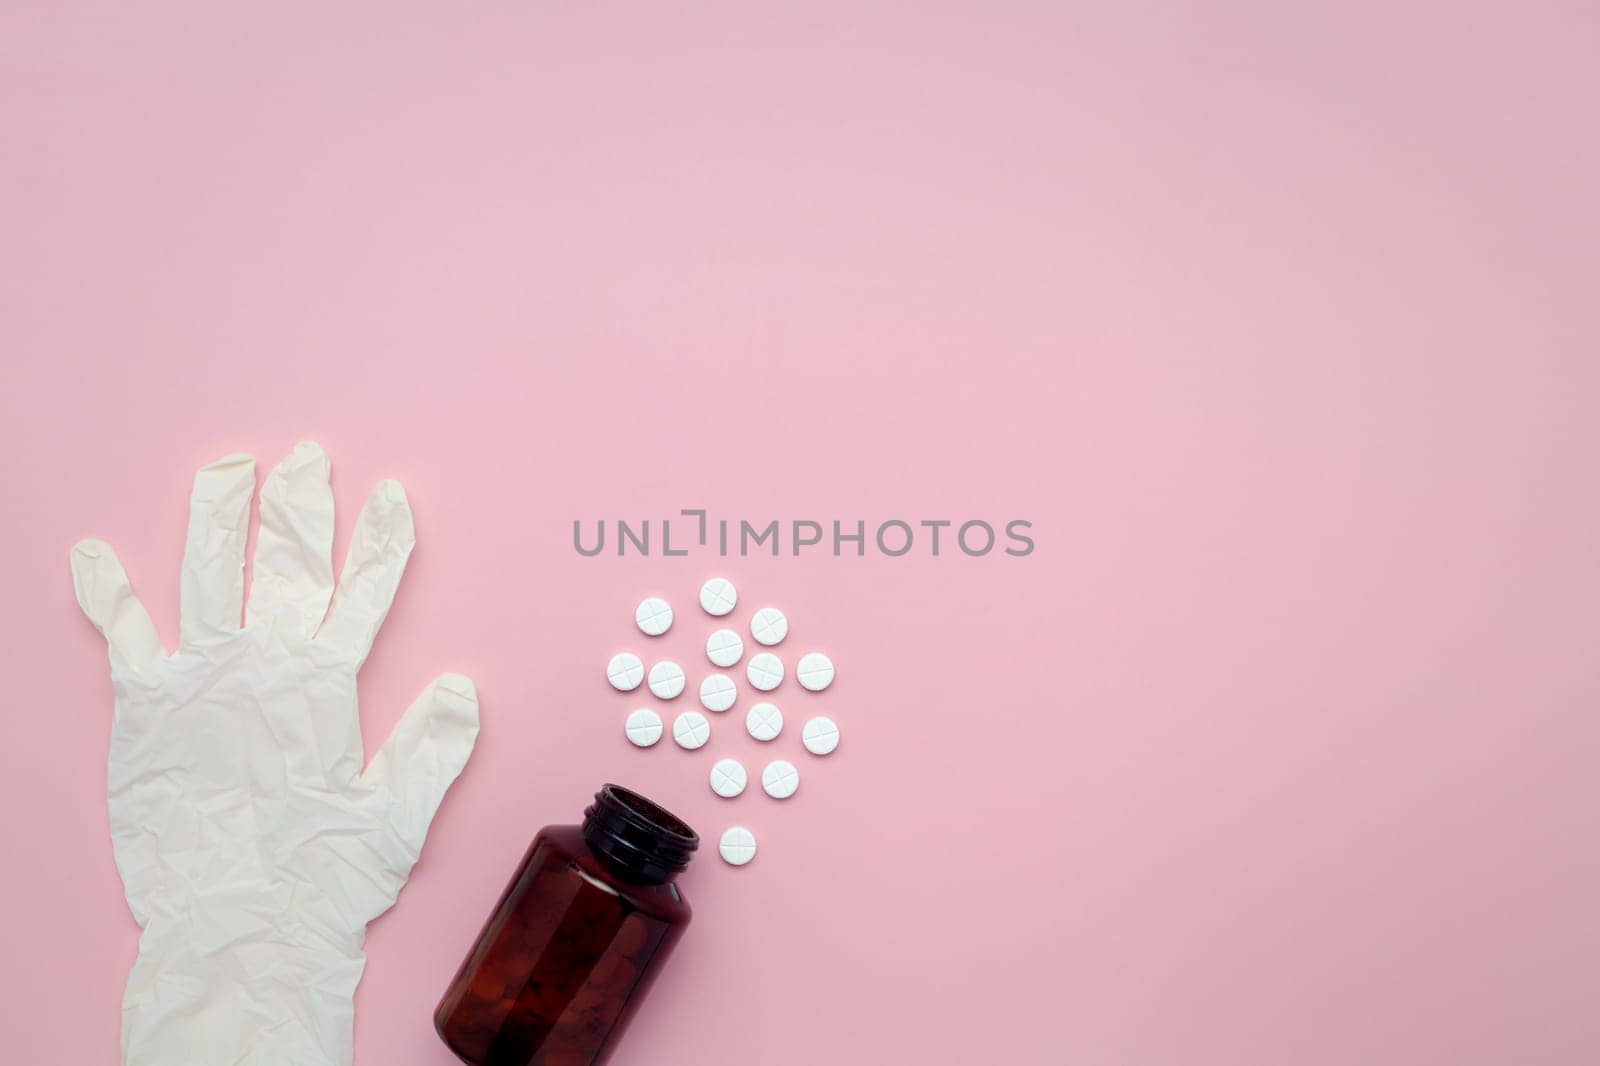 Flat lay of a bottle of medicine, pills, and latex gloves on a pink background by iamnoonmai